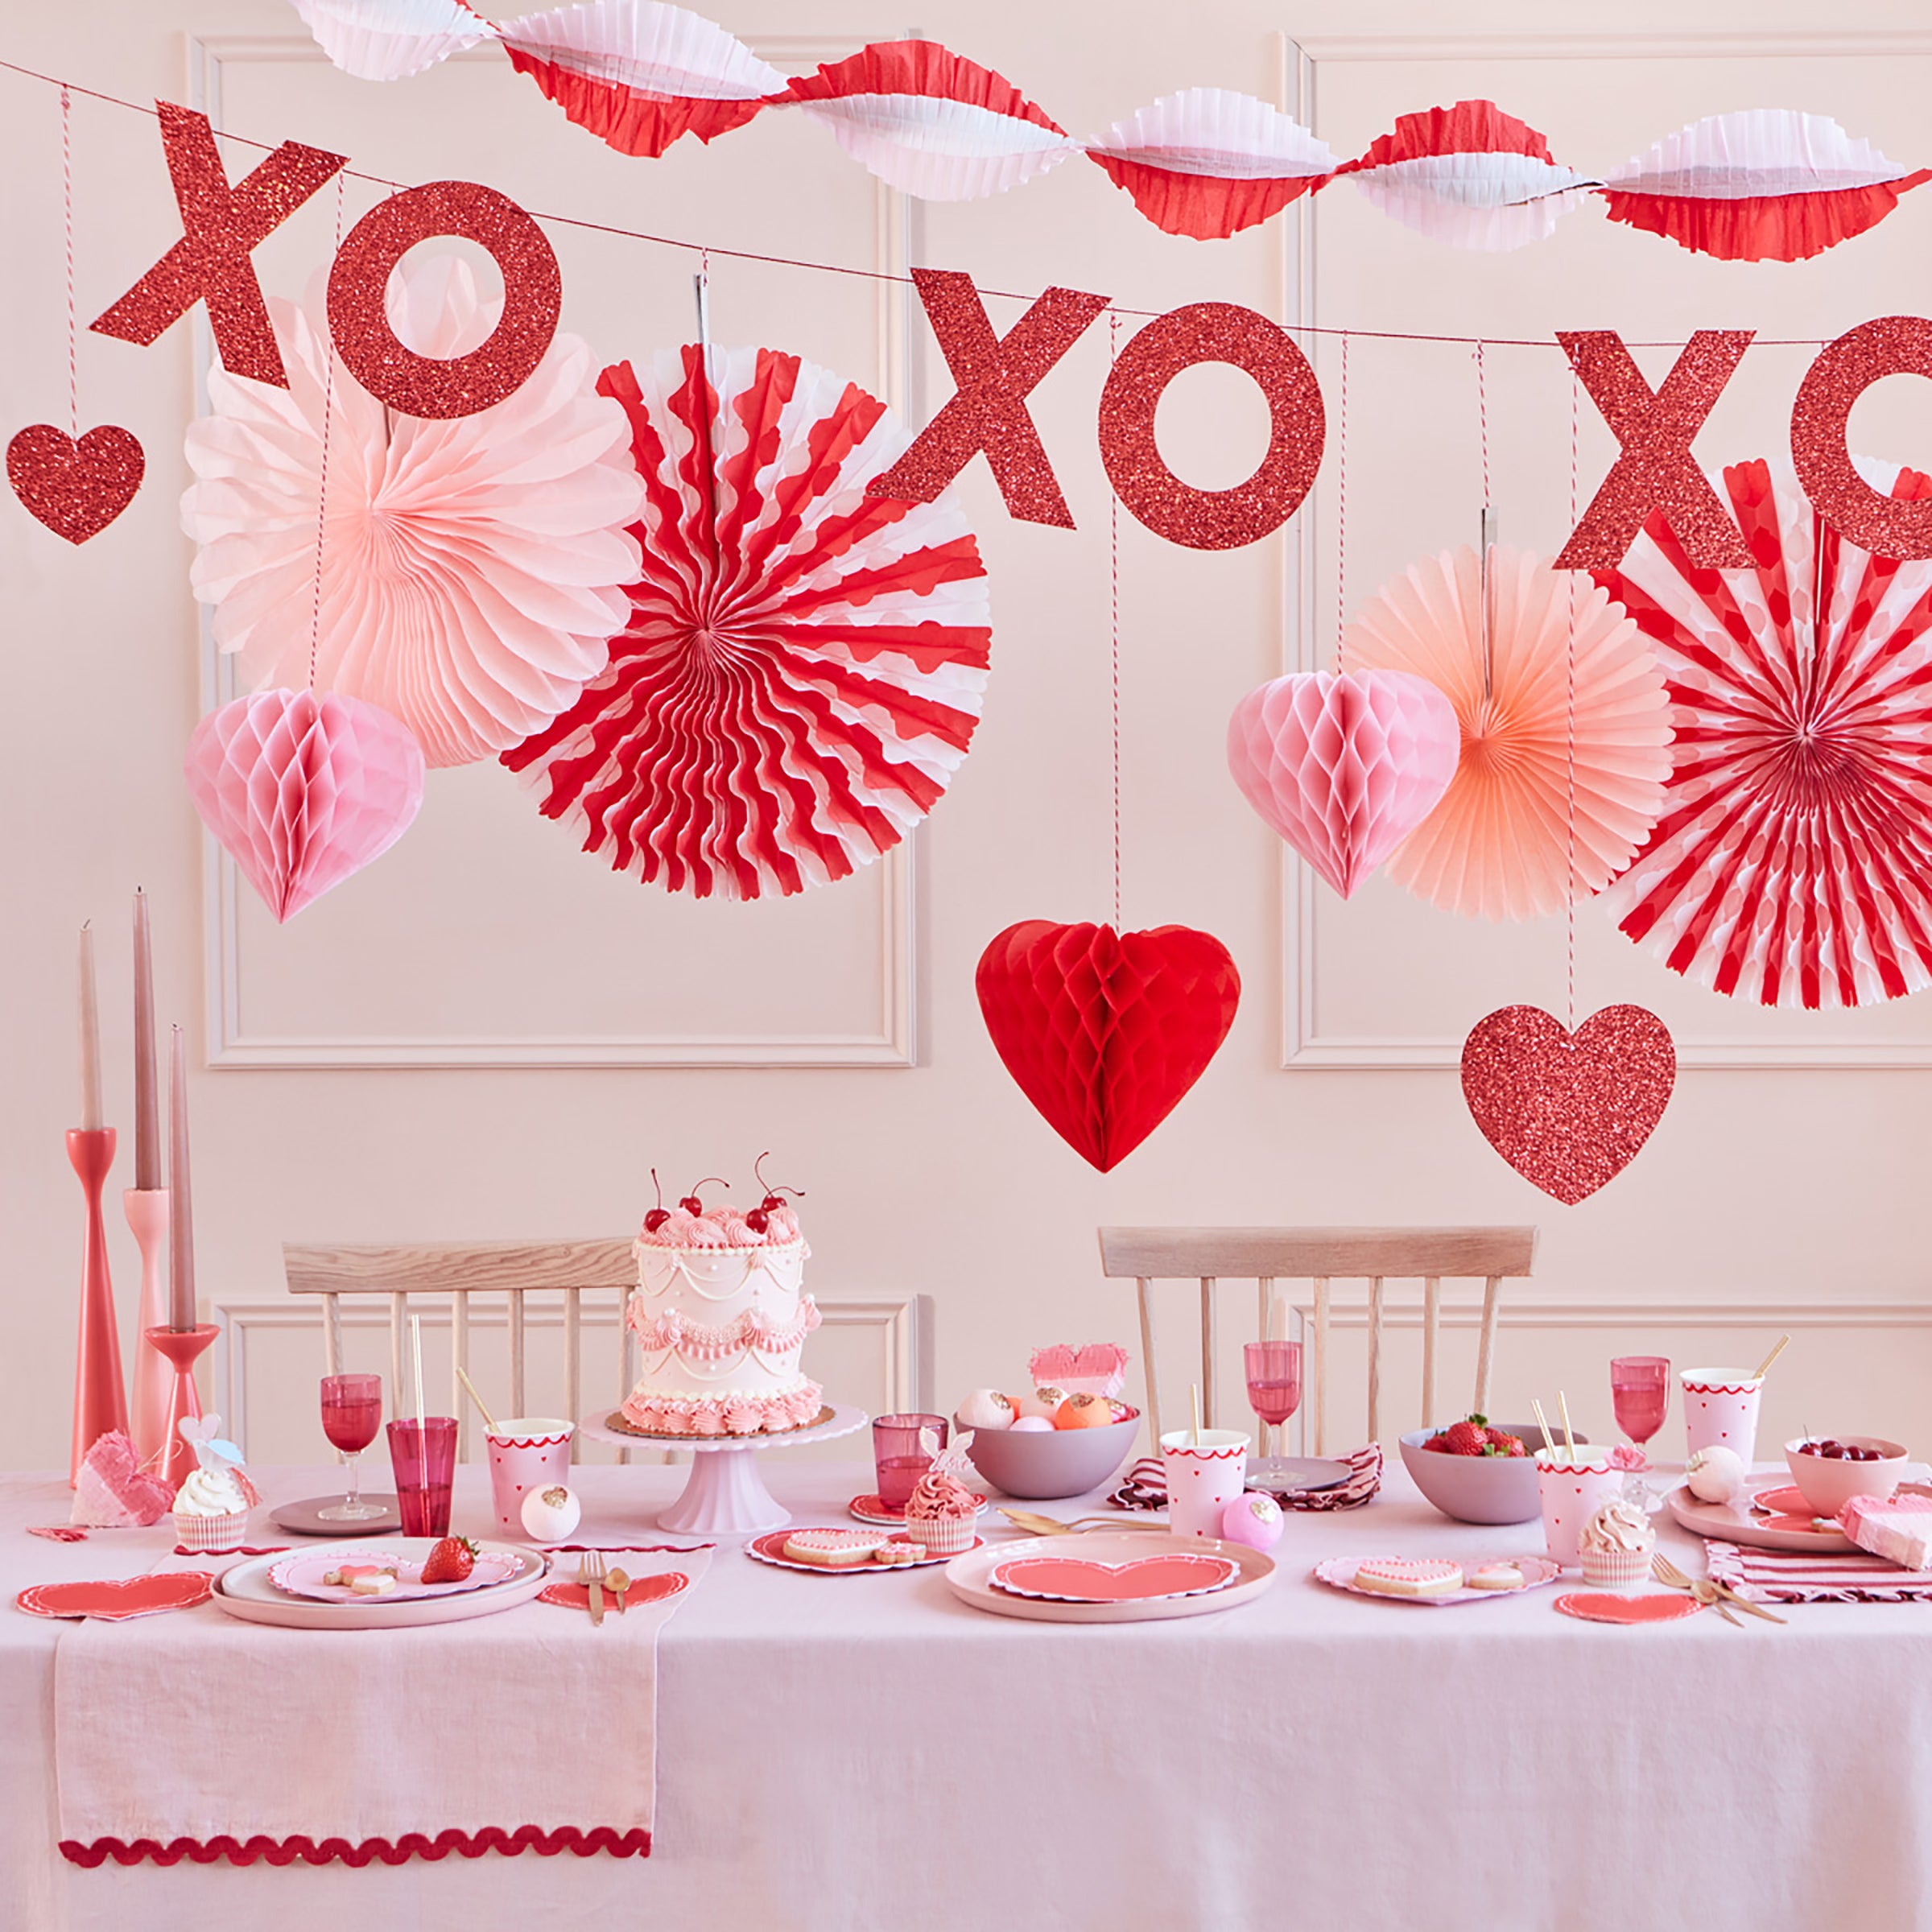 Our party streamer is crafted from pink, red and gold paper perfect for Valentine's Day party decorations.